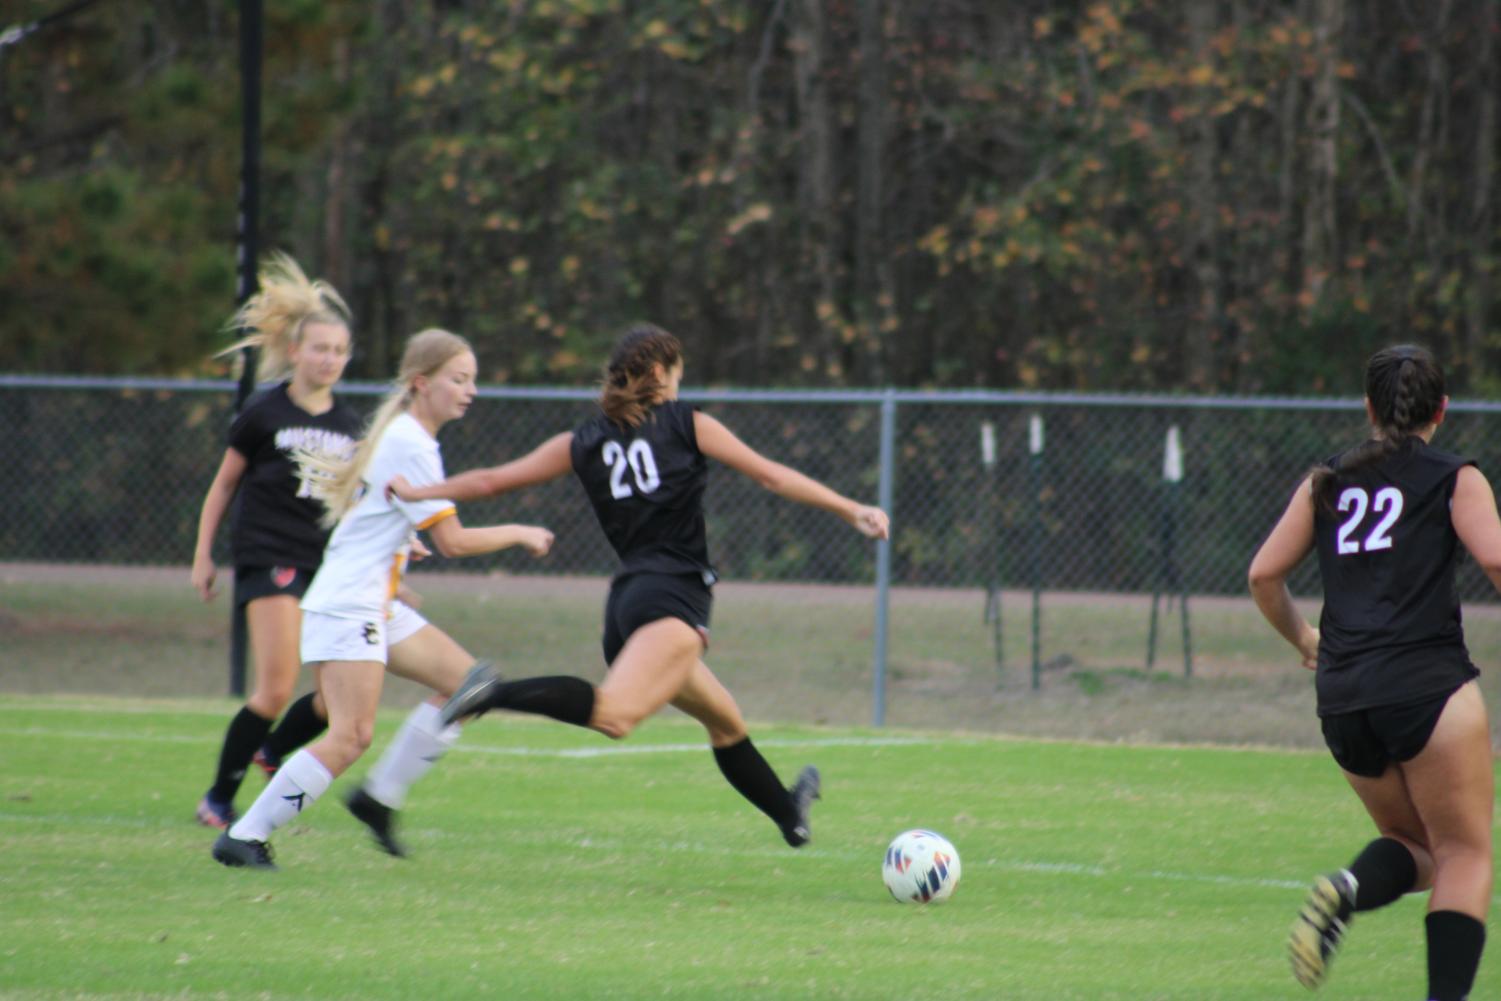 Lady+Mustangs+Soccer+drop+match+to+Southaven+1-3+%7C+Slideshow